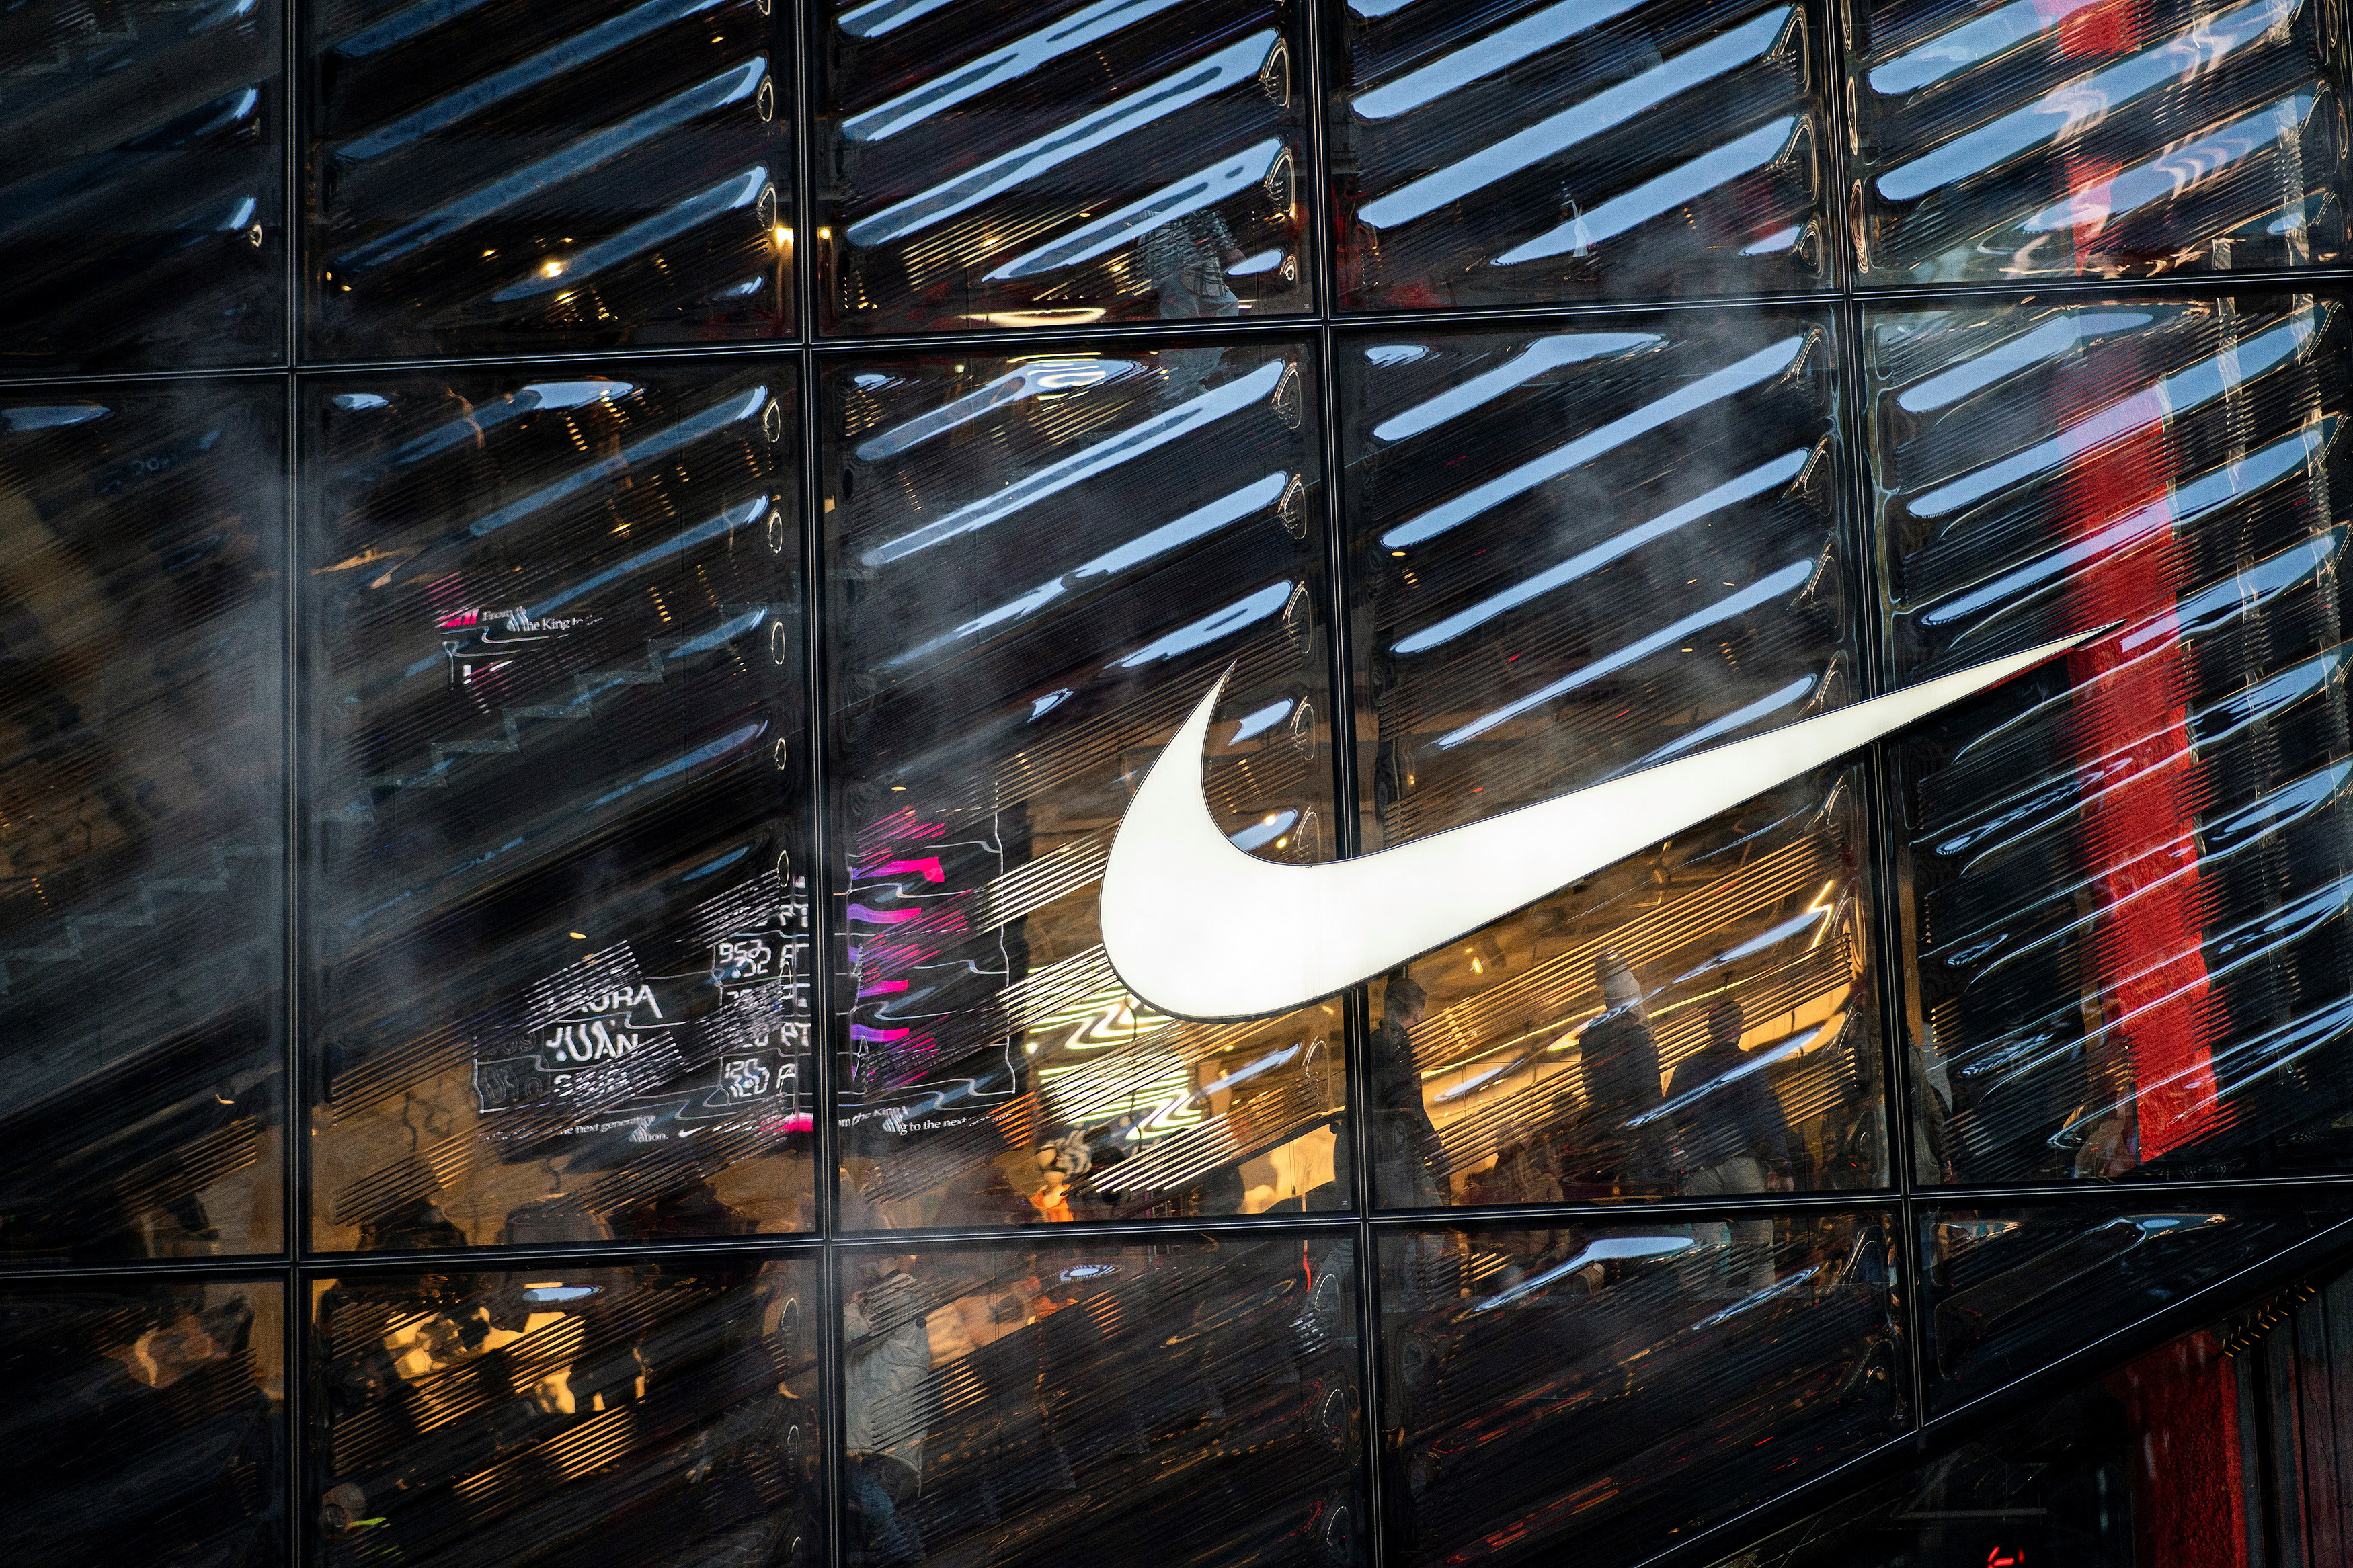 Goedkeuring doen alsof Viskeus Nike beats estimates boosted by discounts, promotions; shares surge |  Reuters